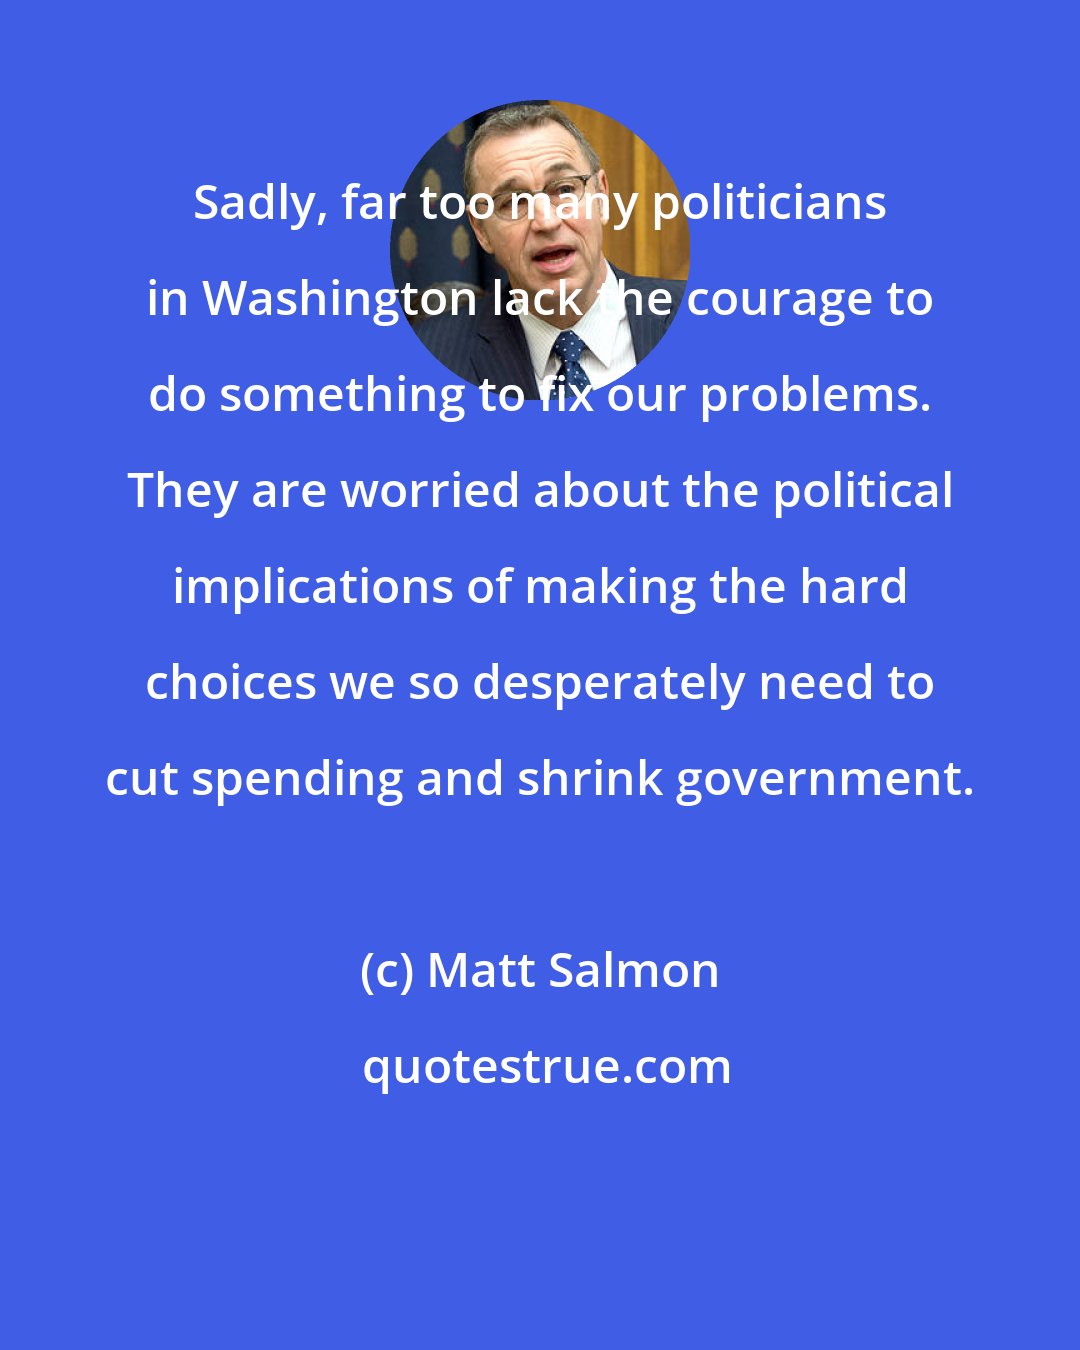 Matt Salmon: Sadly, far too many politicians in Washington lack the courage to do something to fix our problems. They are worried about the political implications of making the hard choices we so desperately need to cut spending and shrink government.